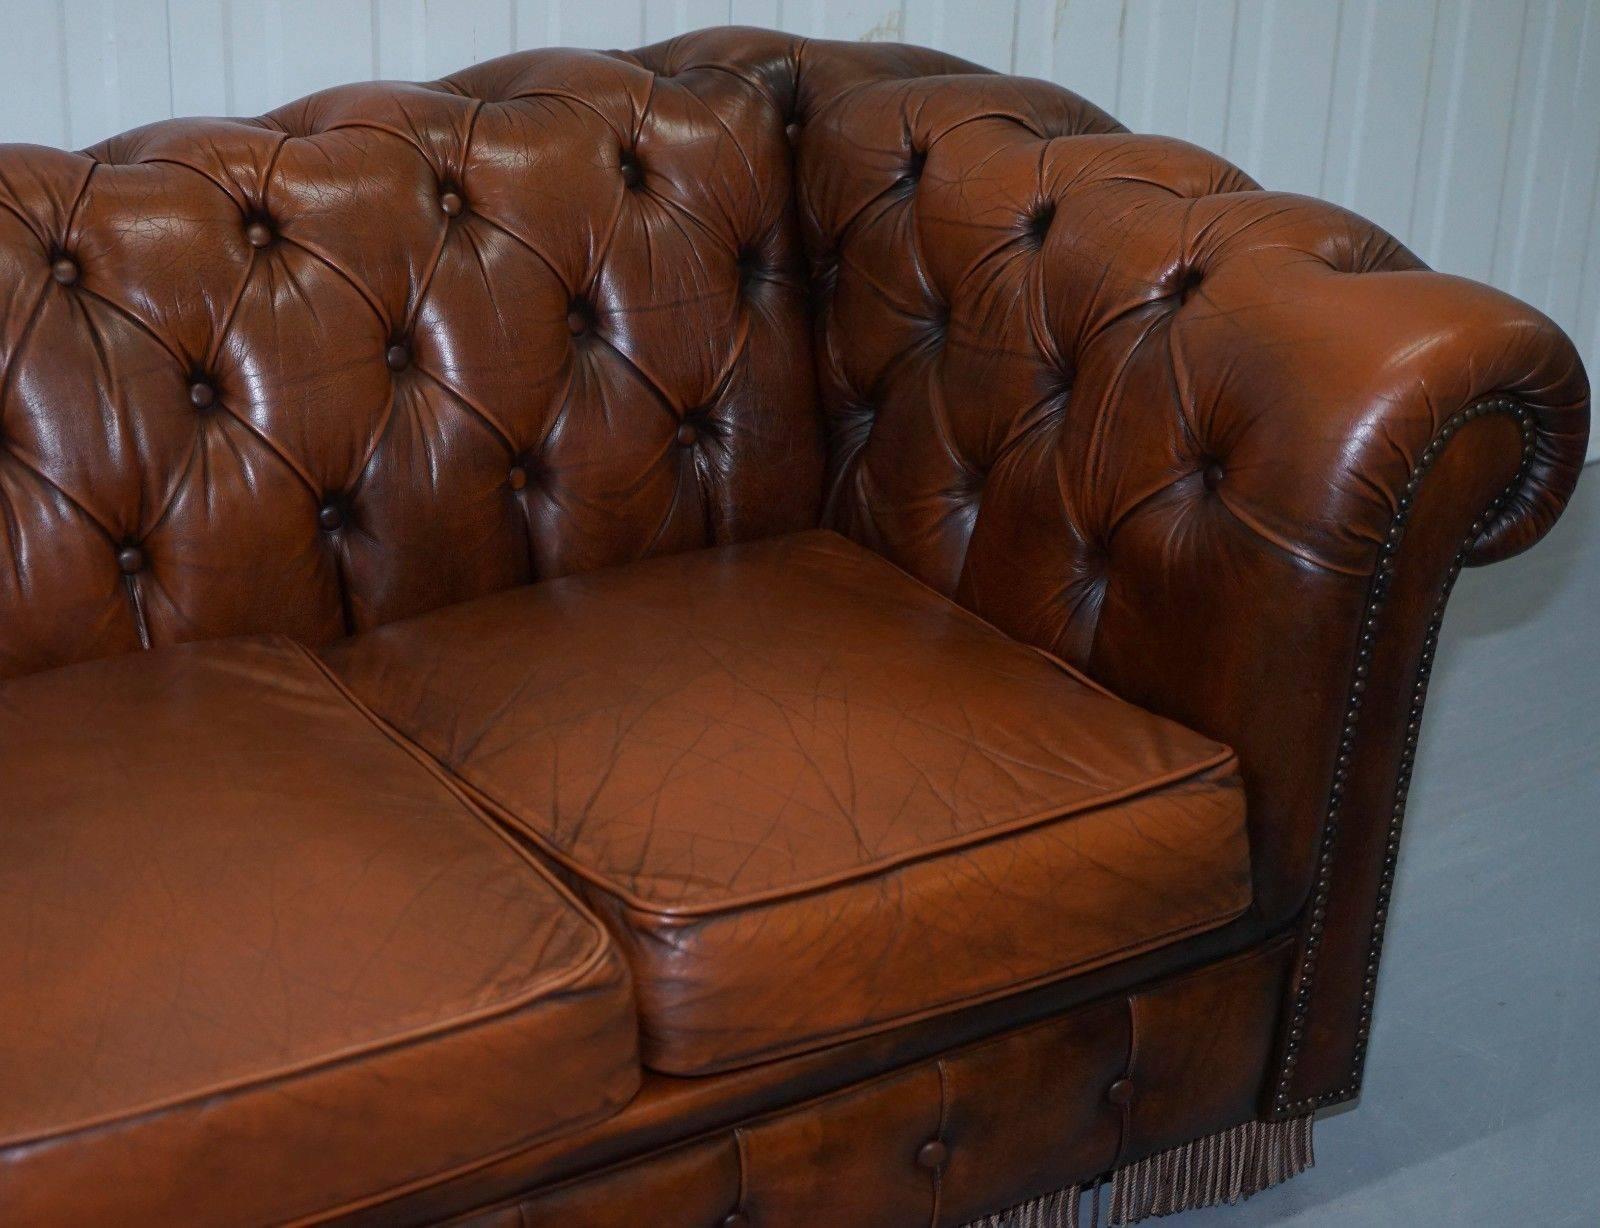 British Original Vintage Hand-Dyed Aged Brown Leather Chesterfield Sofabed Rare Find